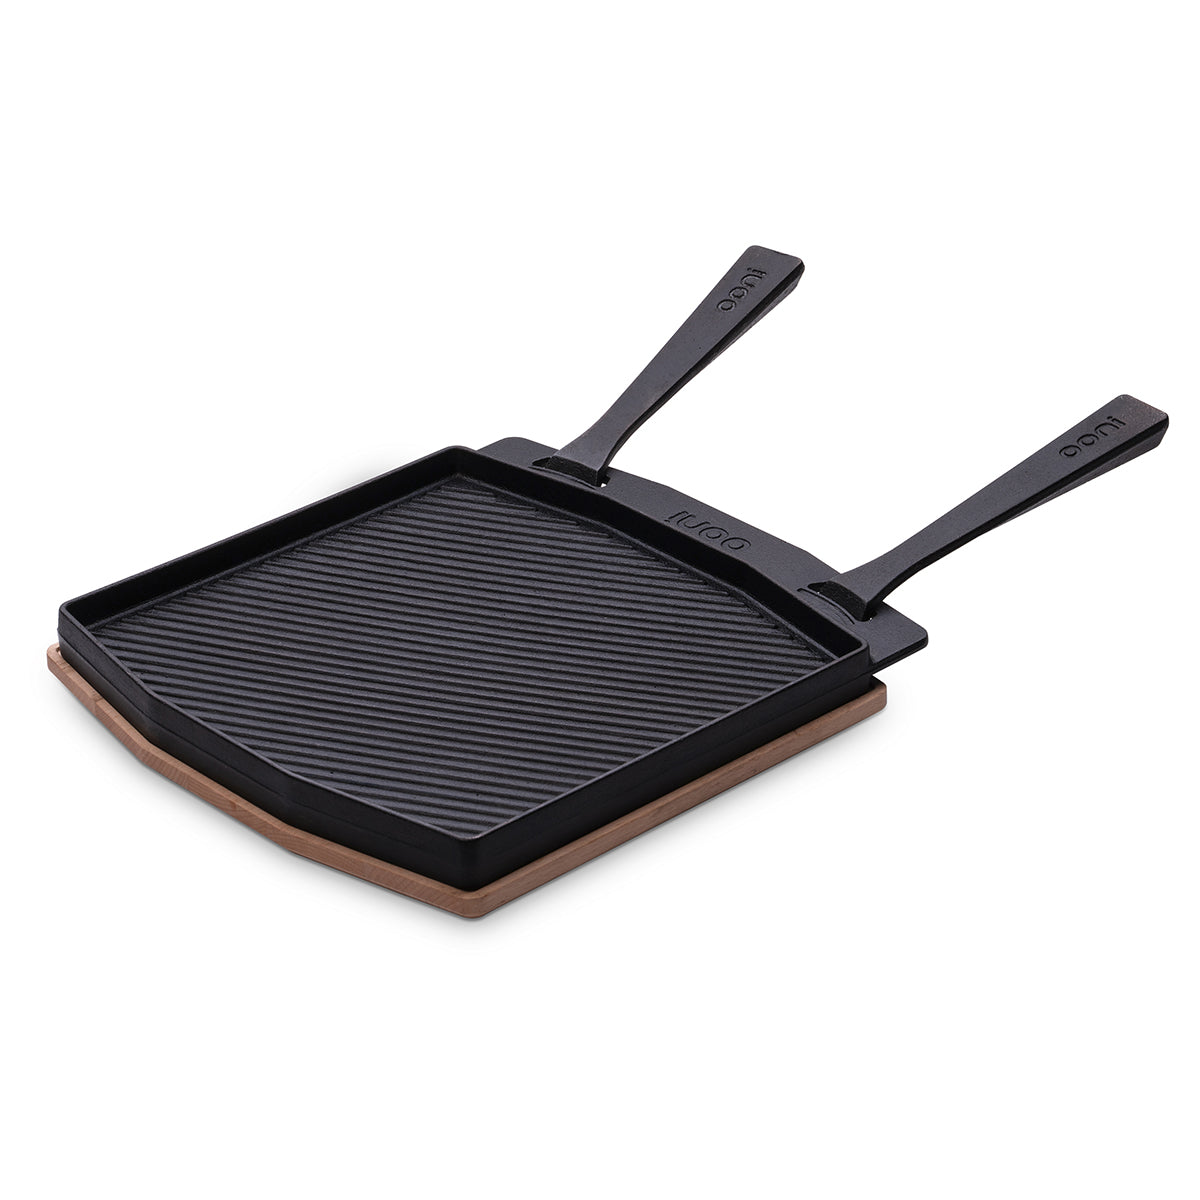 Ooni - Cast Iron Skillet with Wooden Base